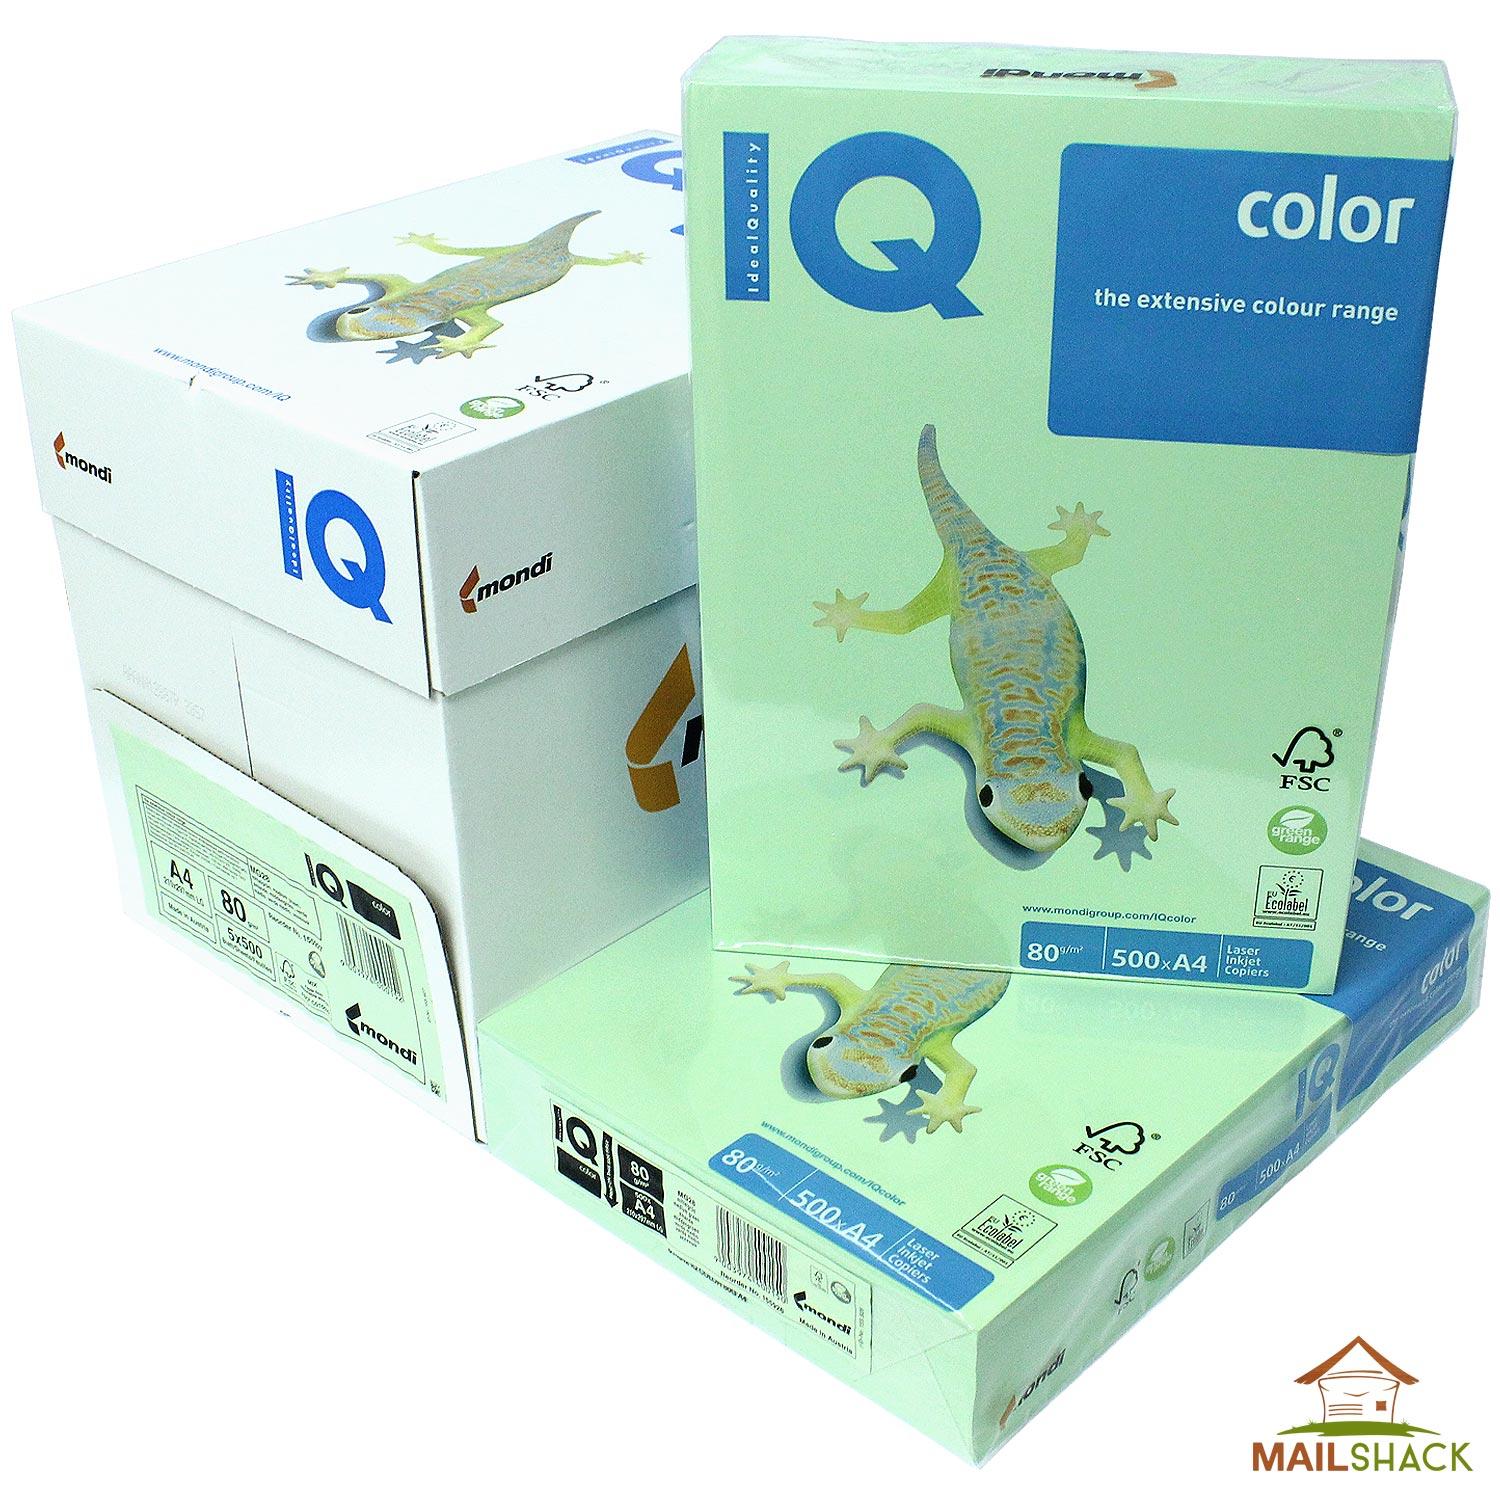 Paper IQ Economy, A4, 80 g/m?, 500 sheets, printer Papers